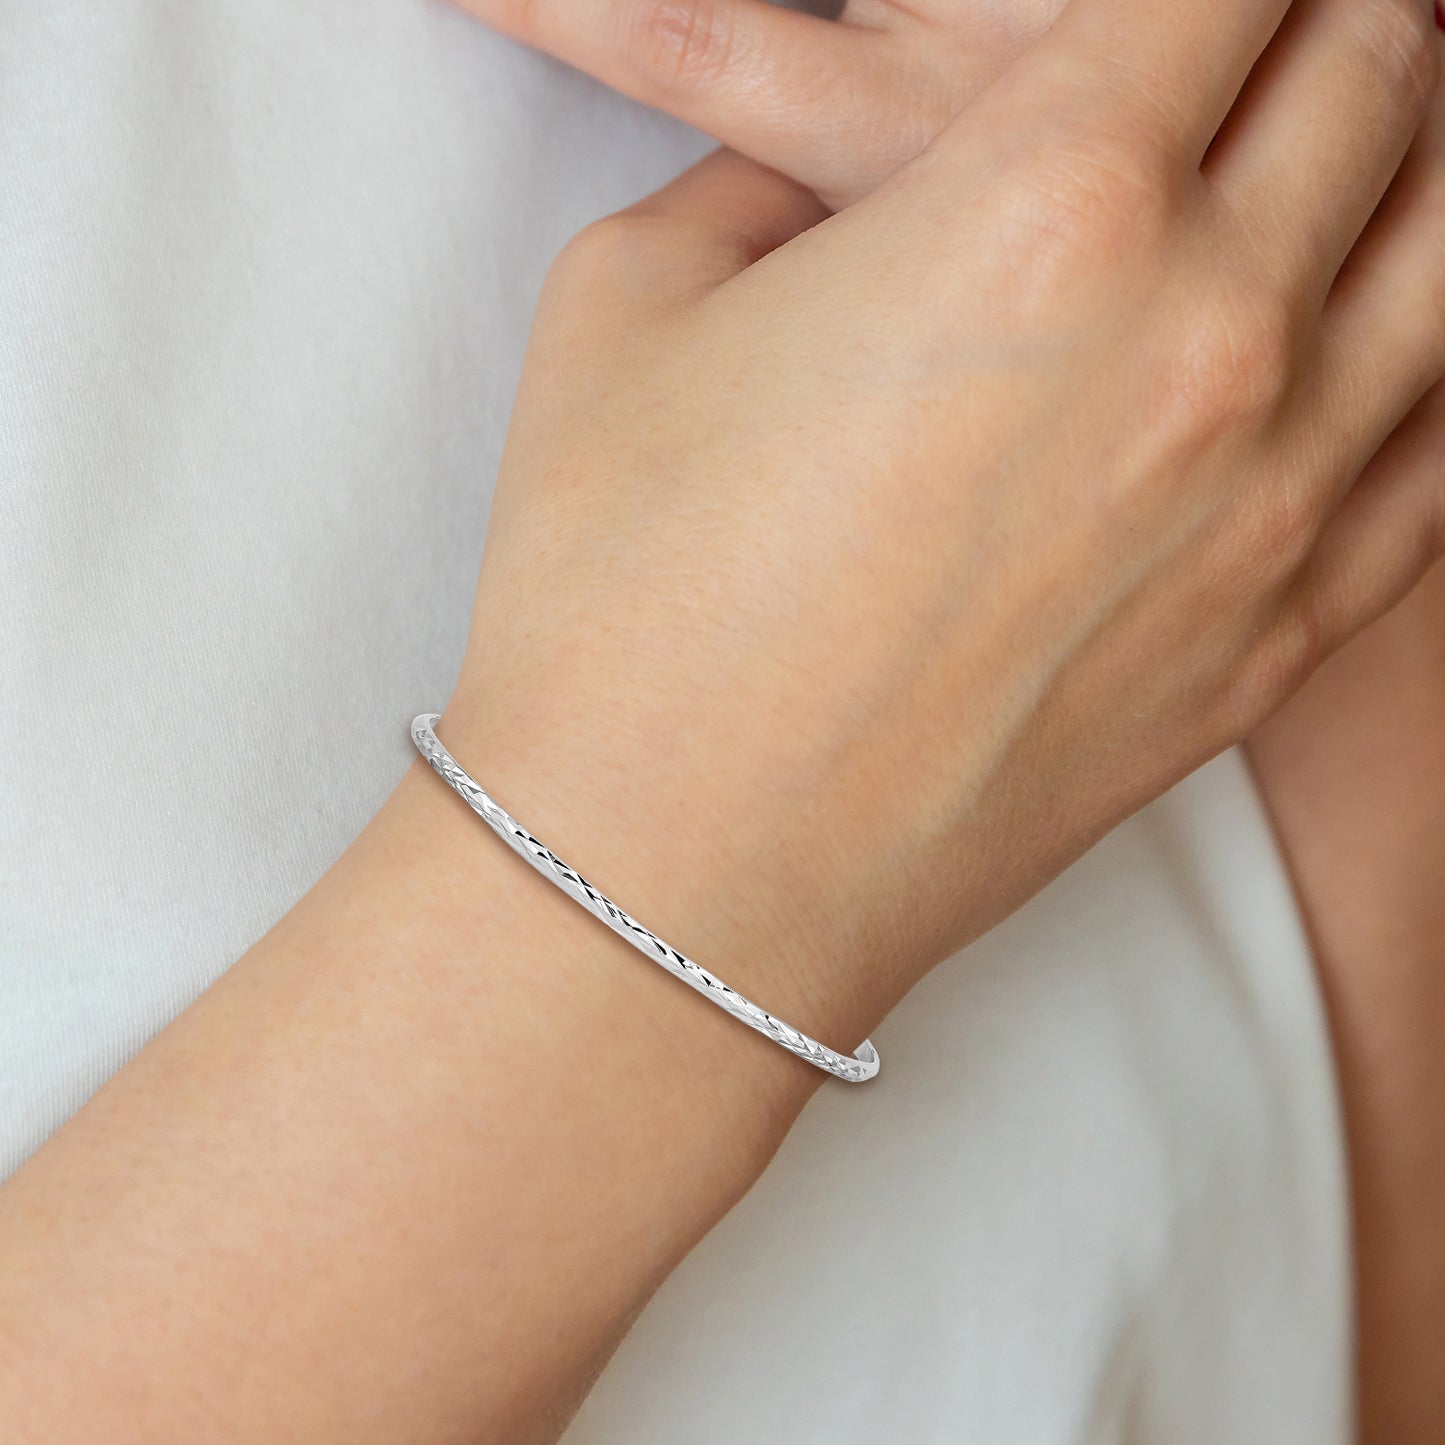 Sterling Silver Rhod. Plated D/C Slip-on Child's Bangle